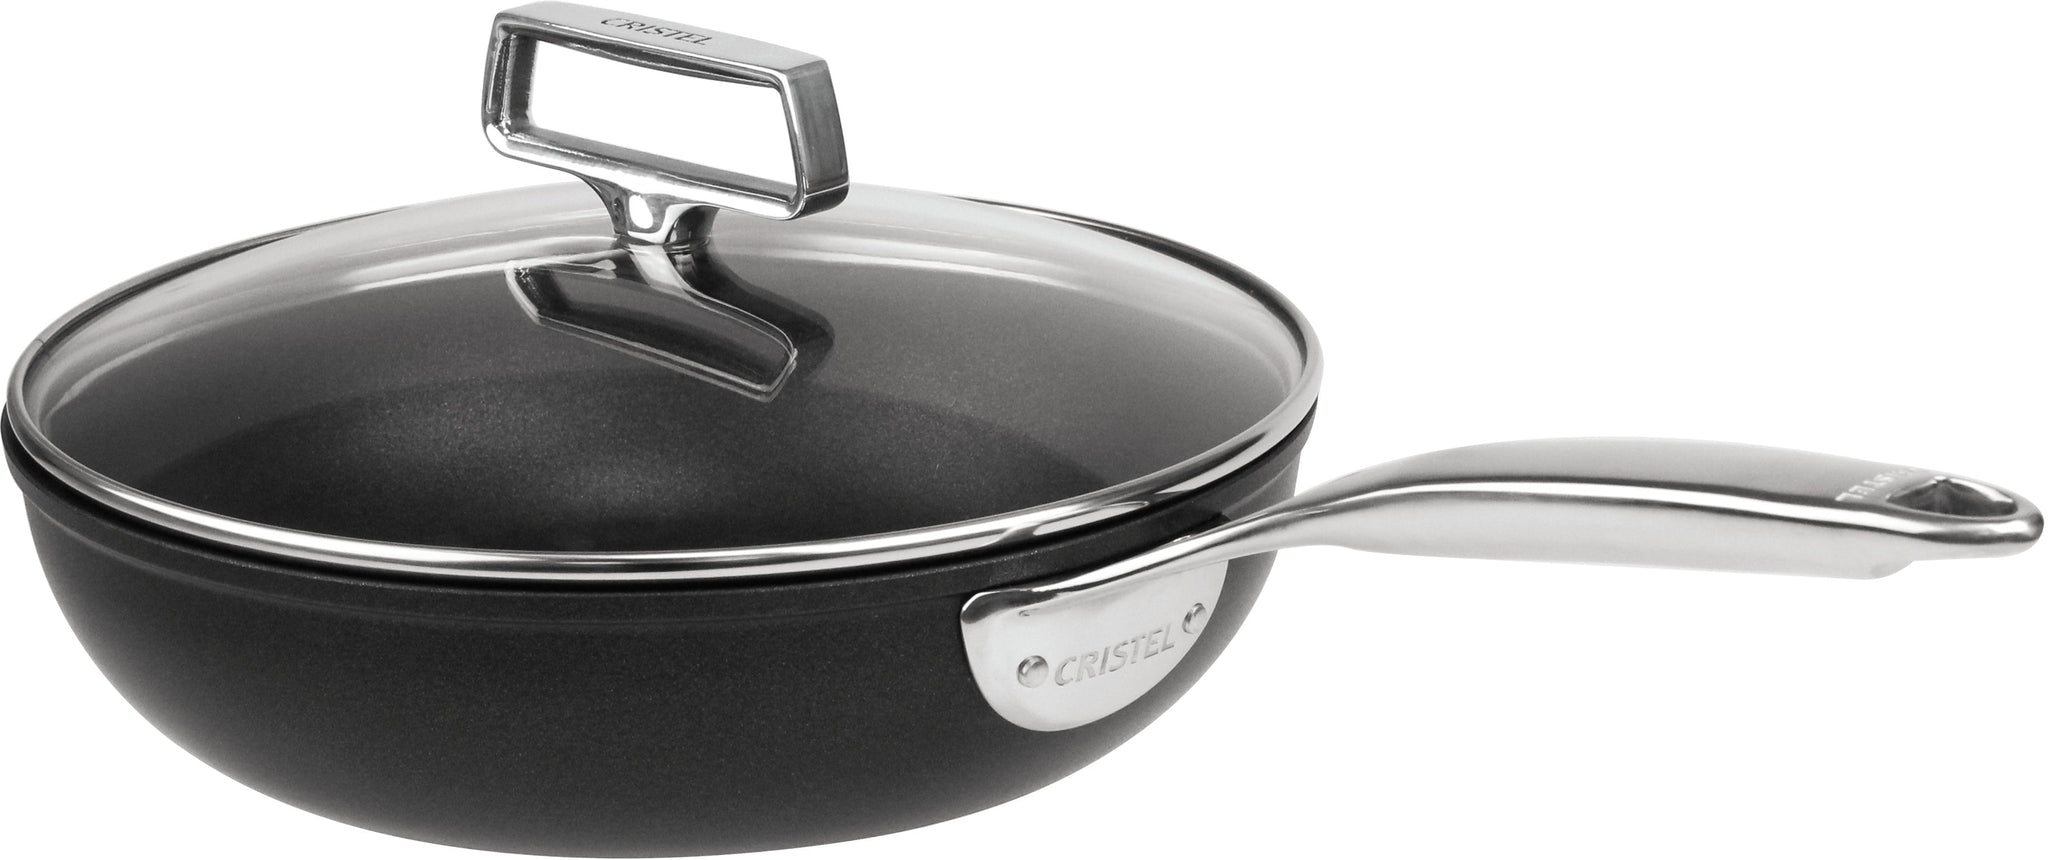 Cristel - 3.4 QT Non-Stick Sauté-Pan With Lid and Fixed Handle Castel'Pro Ultralu Collection - S28CPFAE